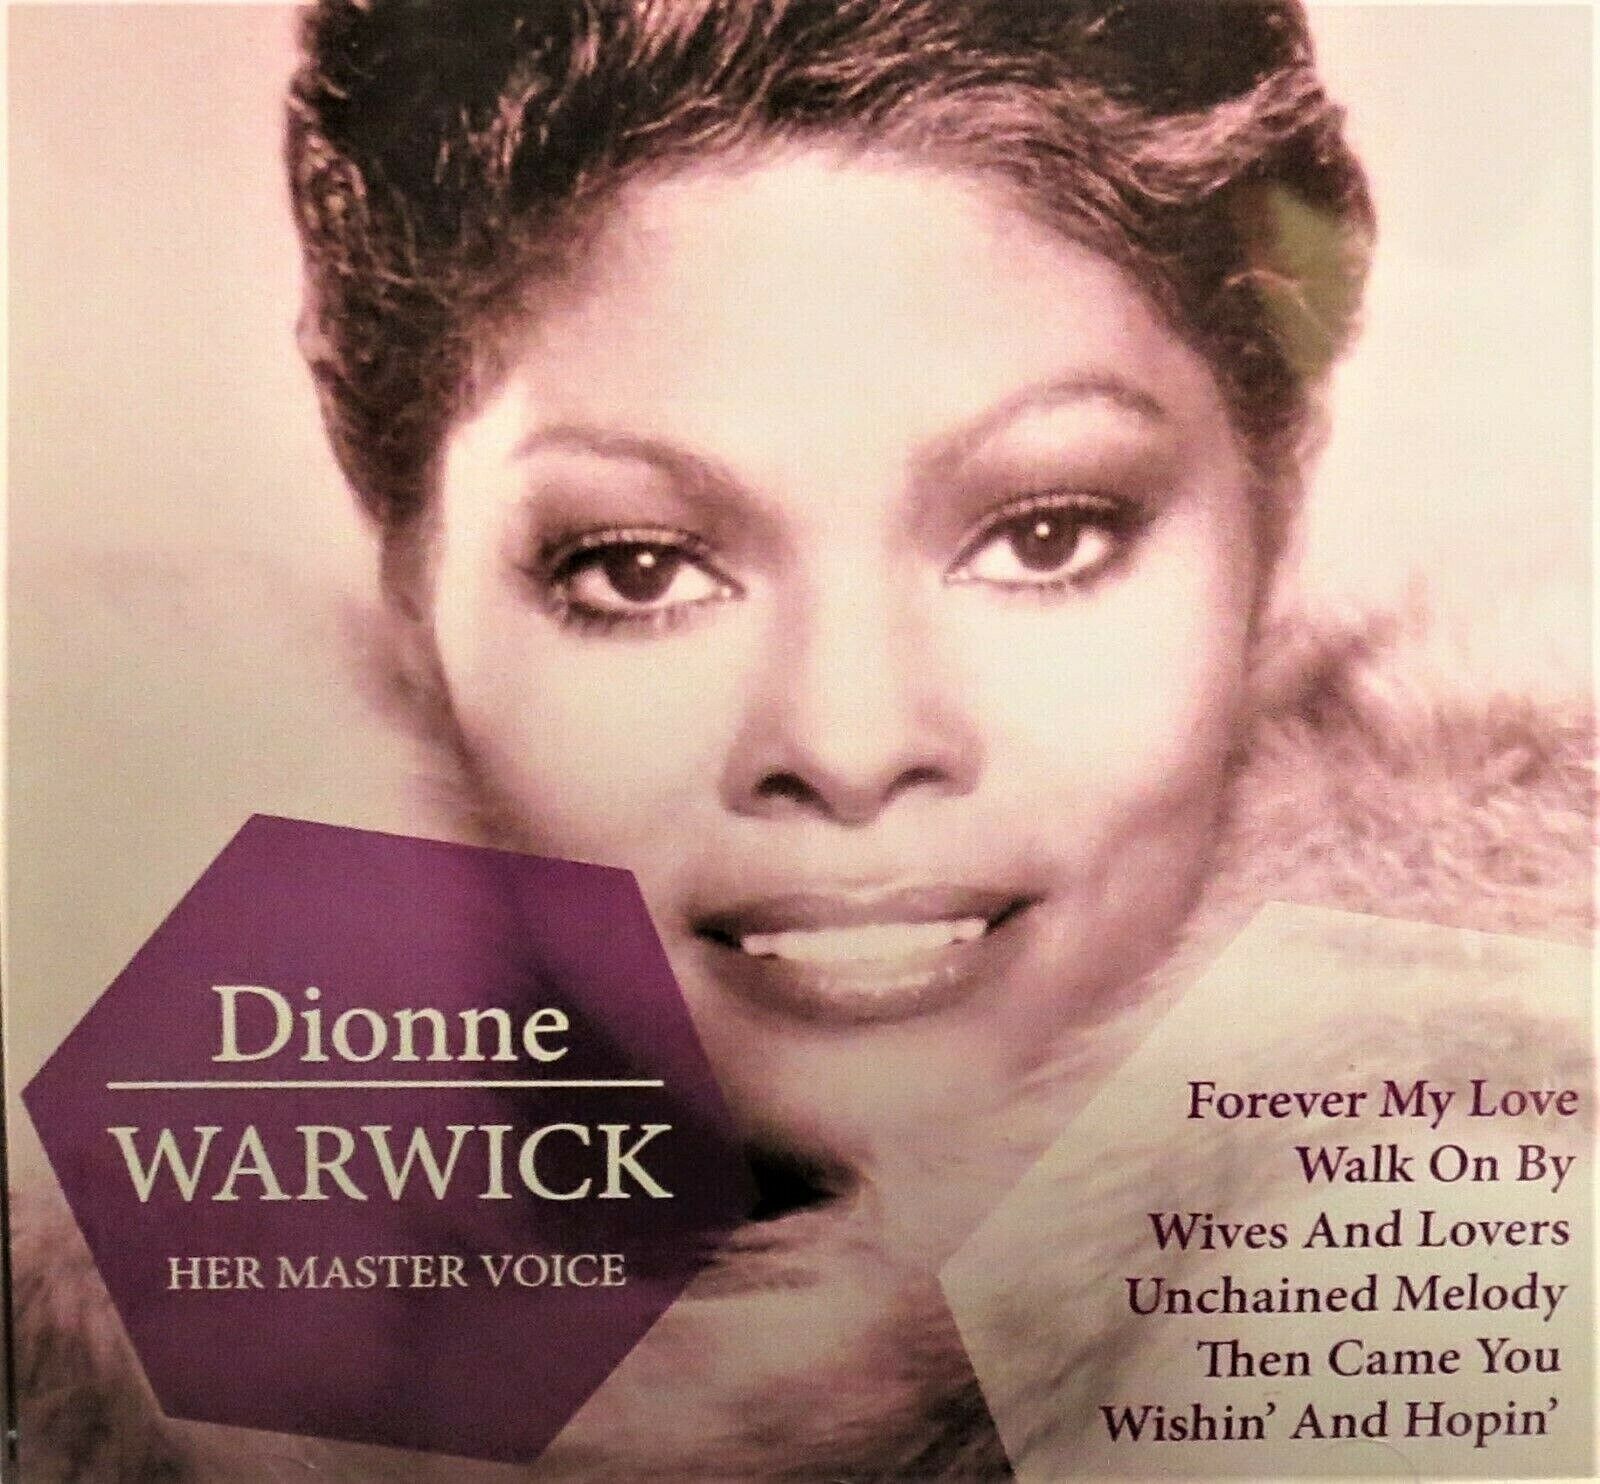 DIONNE WARWICK Best of Hits NEW CD 15 Tracks,Forever my Love,Endless Love